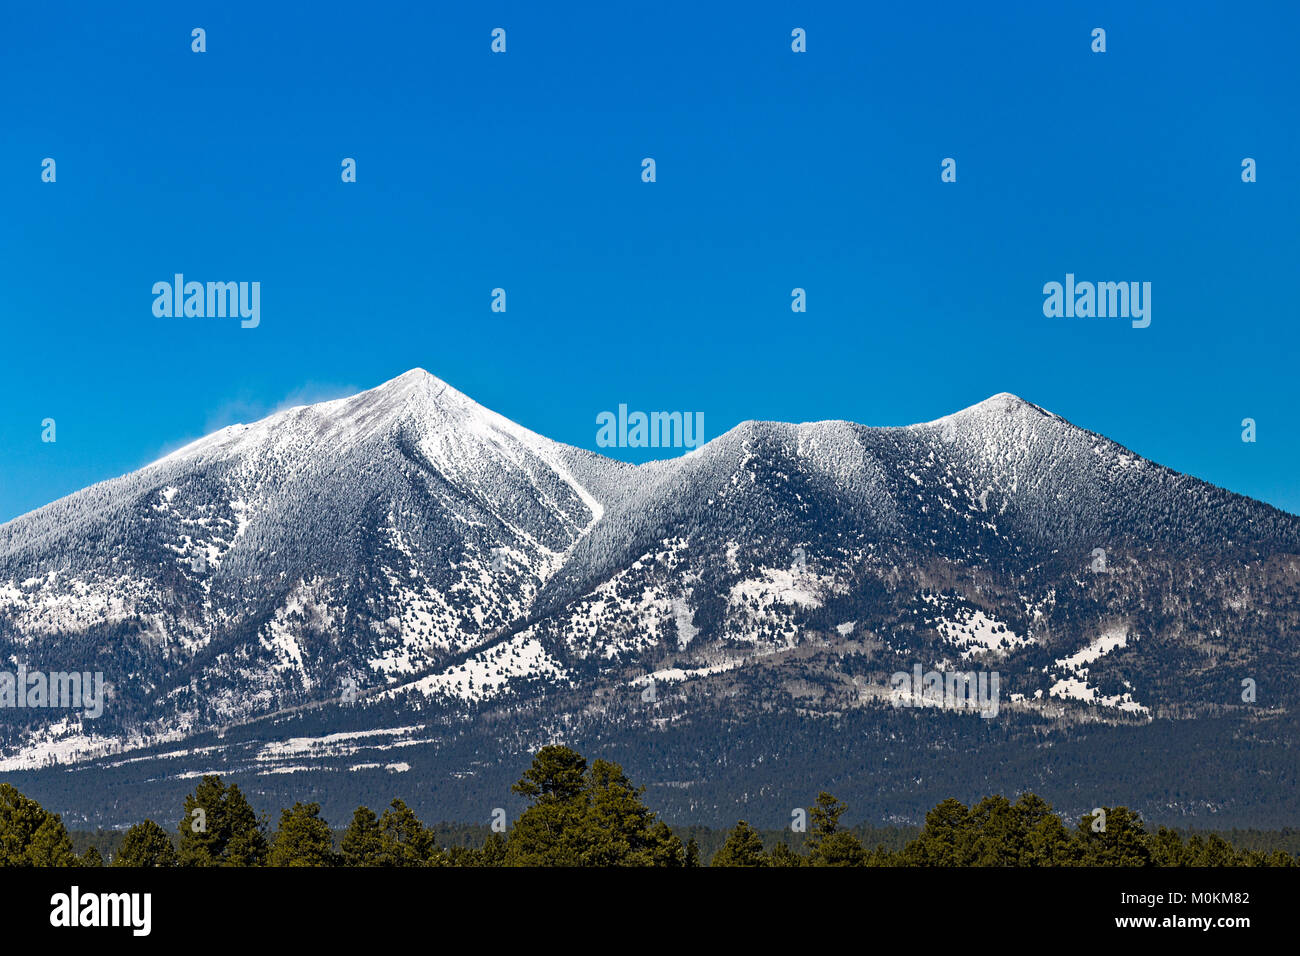 The San Francisco Peaks mountains with blue sky after a winter snow in Flagstaff, Arizona Stock Photo